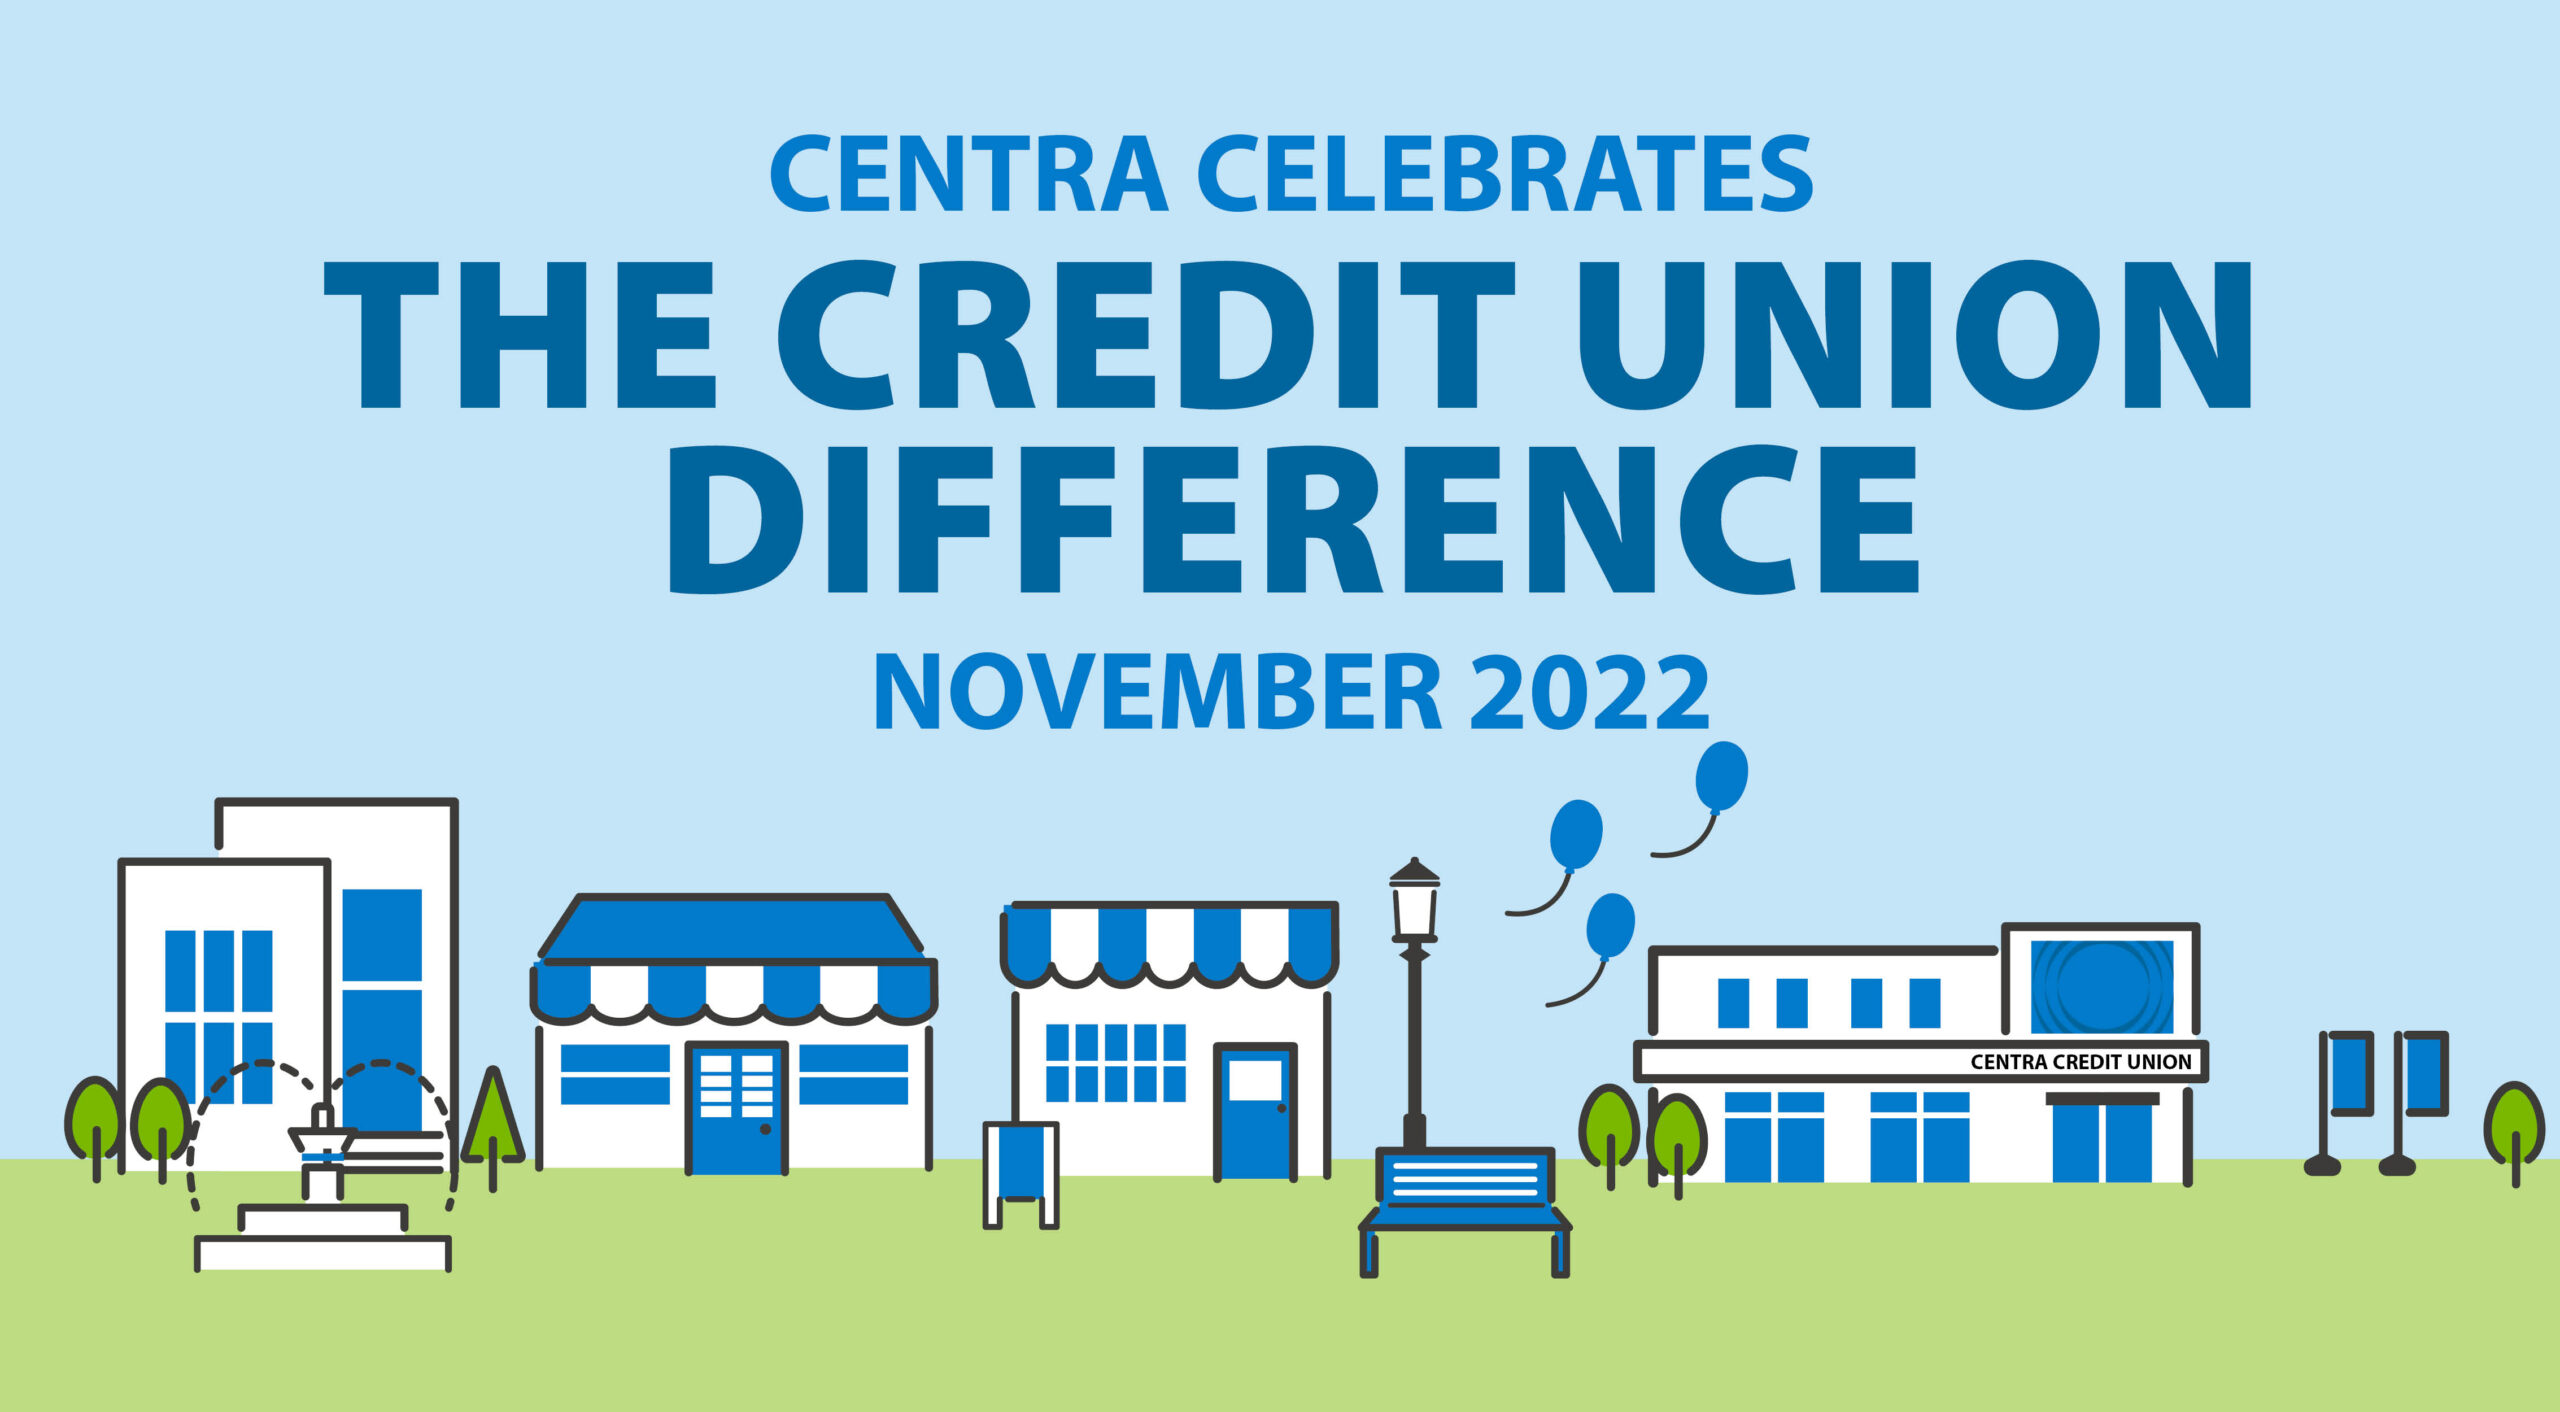 The credit union difference